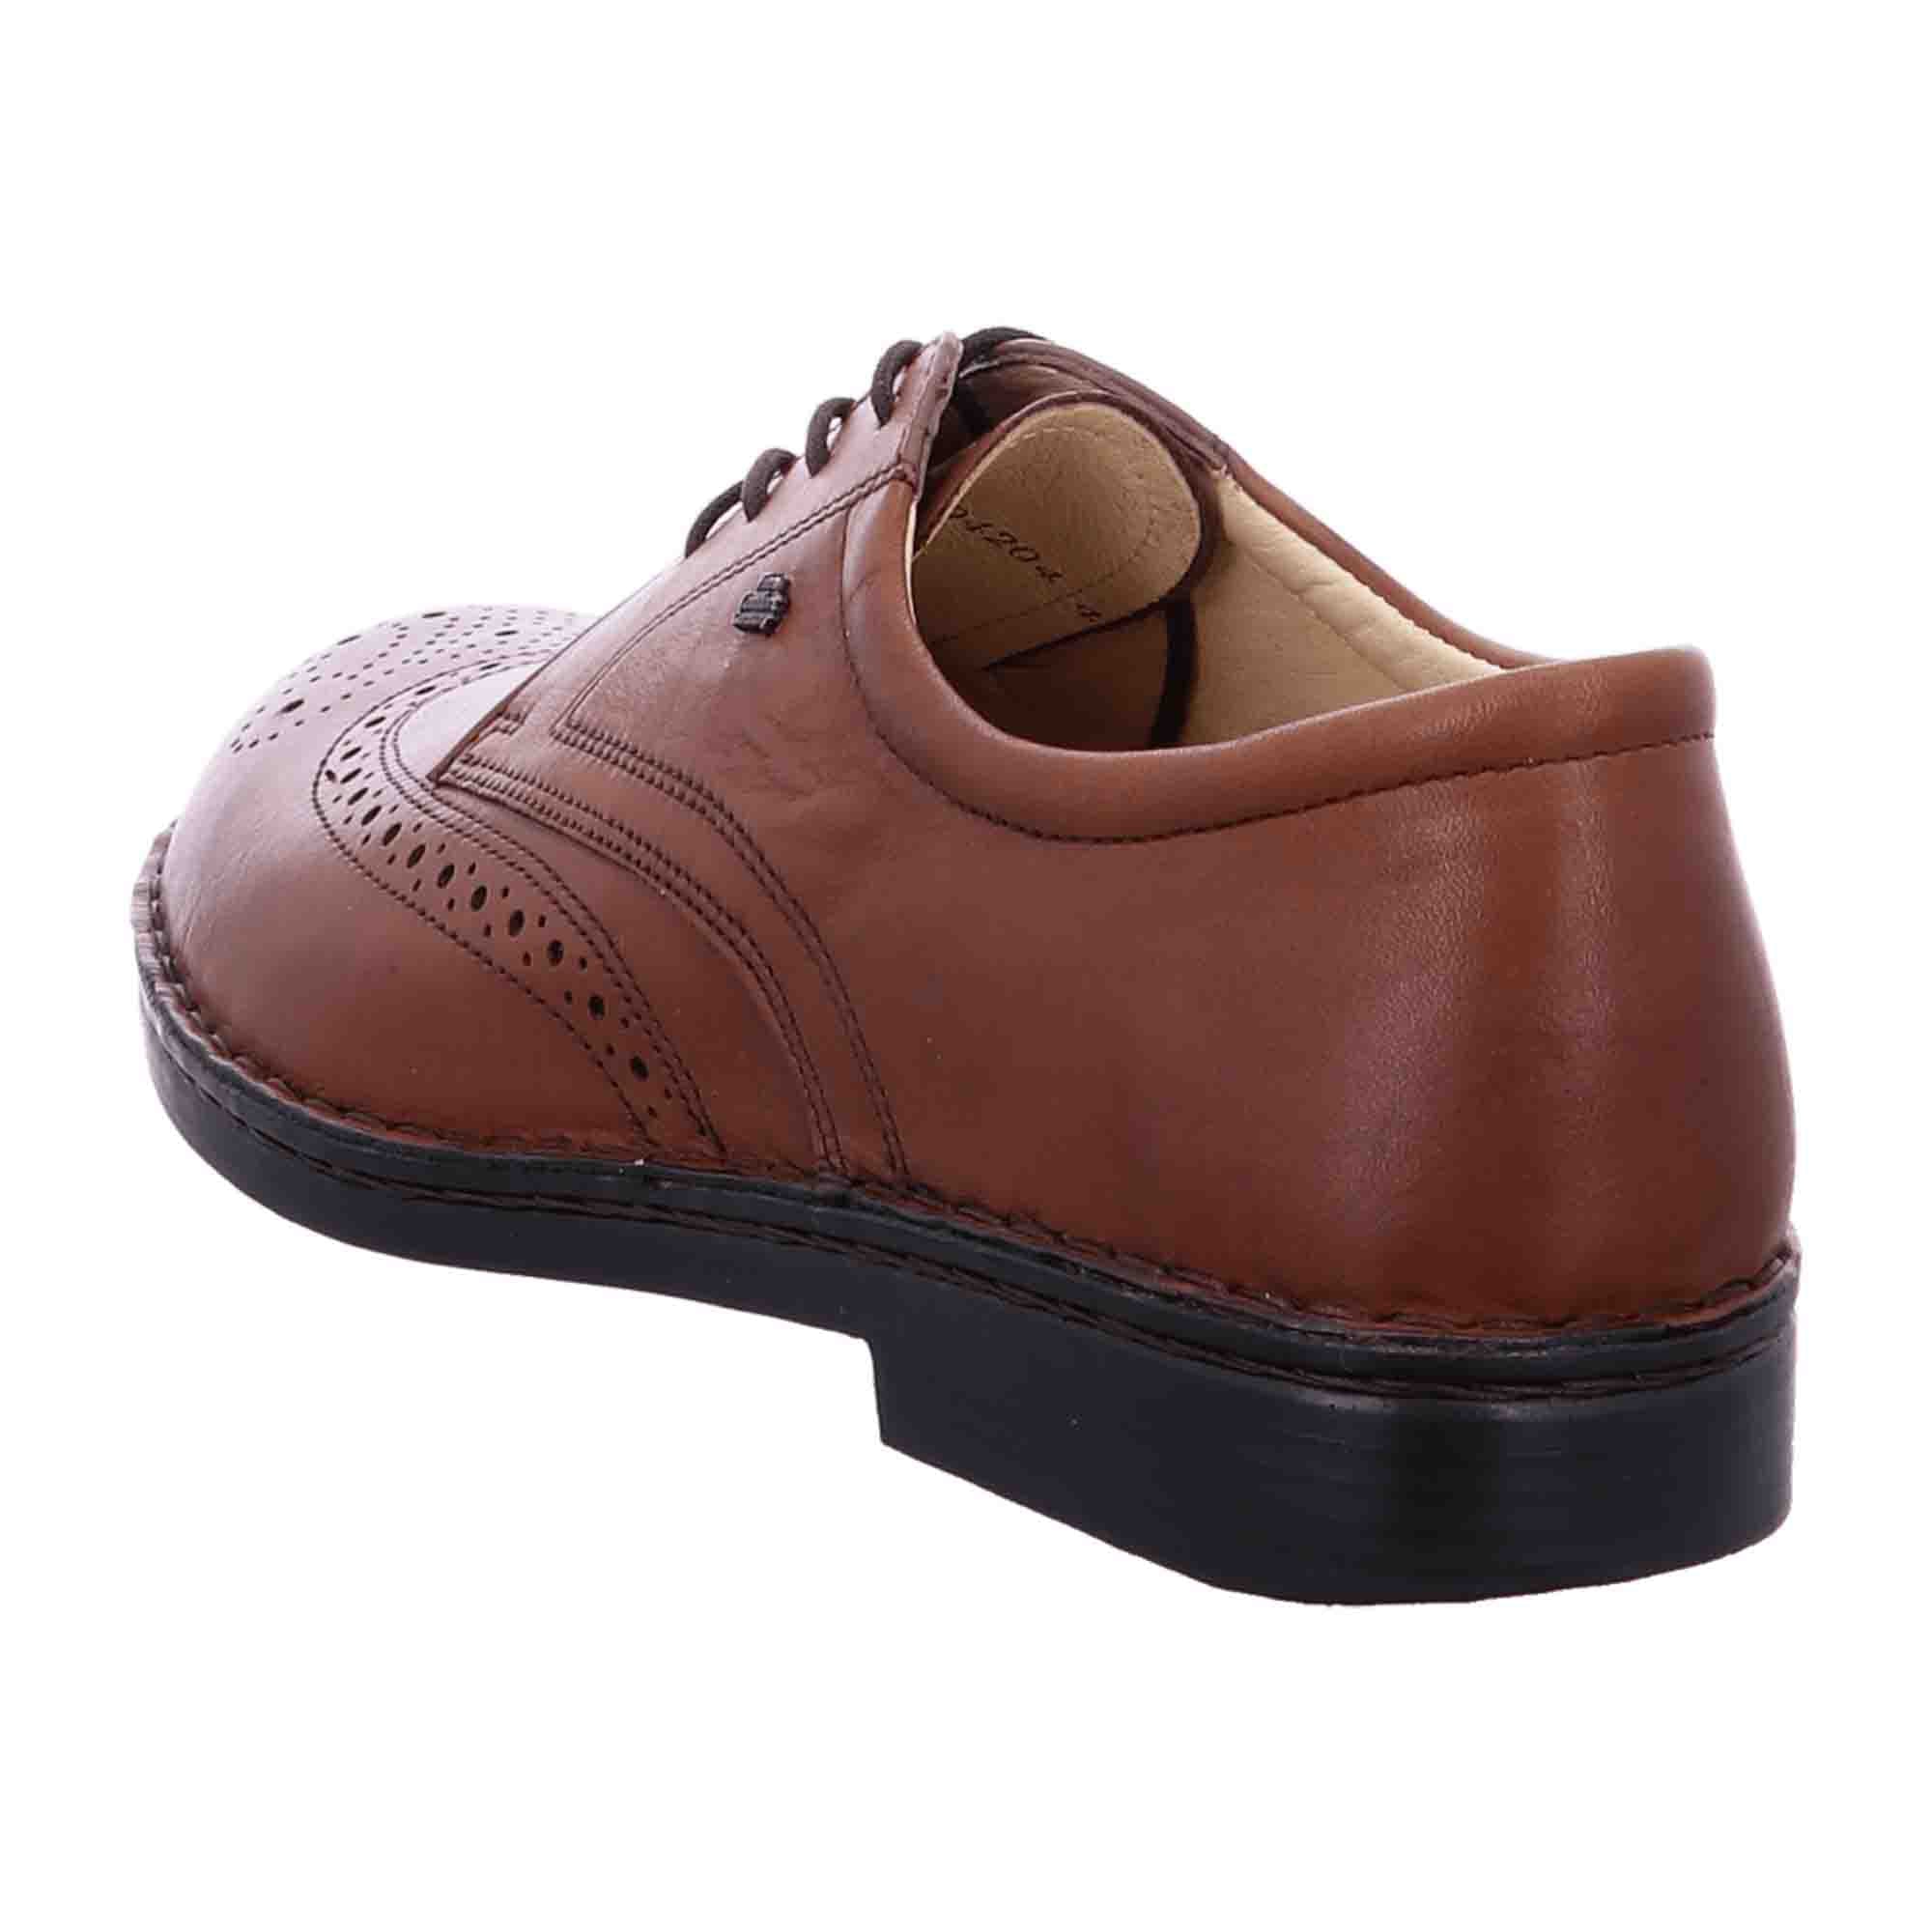 Finn Comfort Budapest Men's Brown Leather Shoes - Durable & Stylish